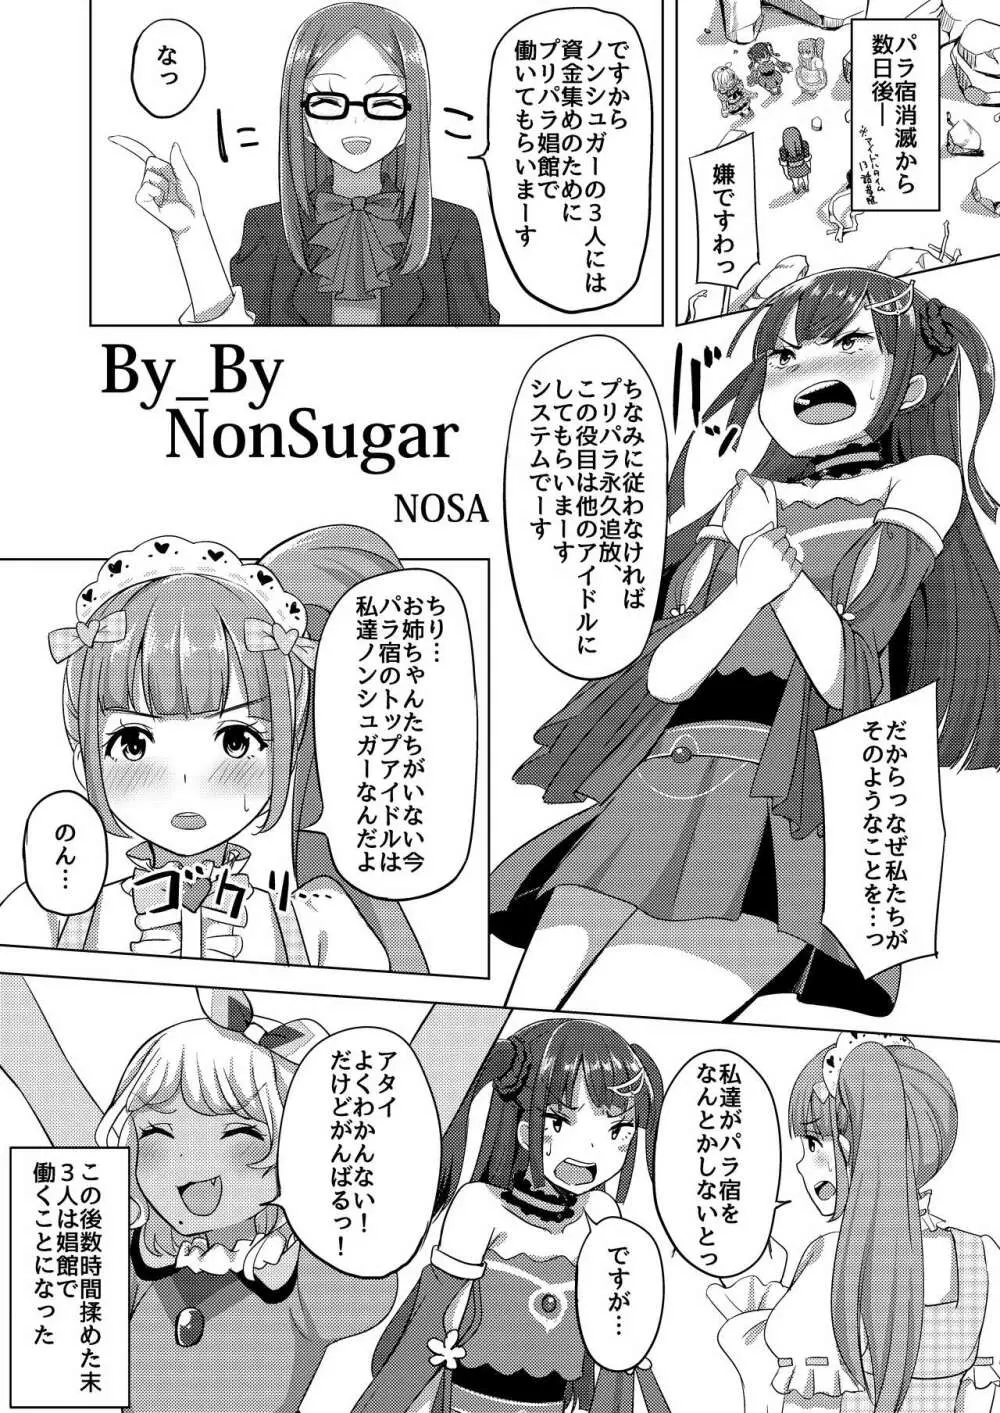 By_By NonSugar - page1